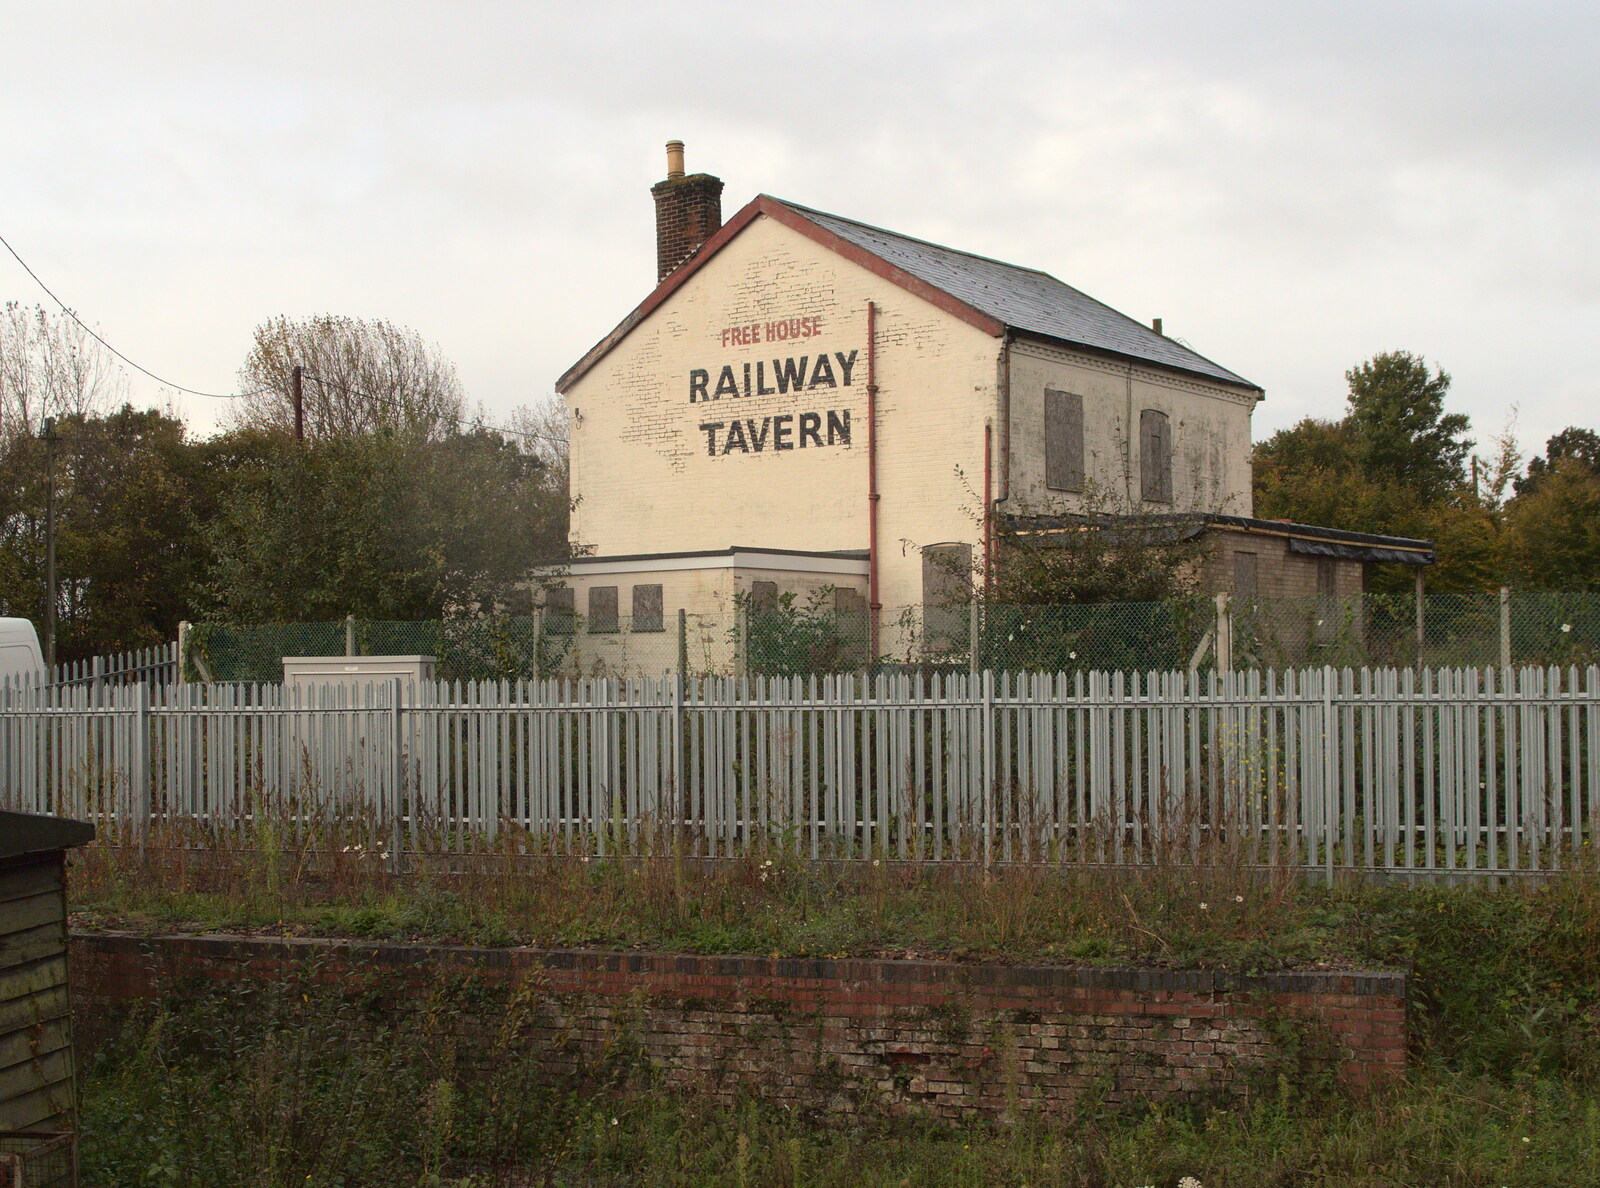 The Railway Tavern pub near Haughley Junction from (Very) Long Train (Not) Running, Stowmarket, Suffolk - 21st October 2014